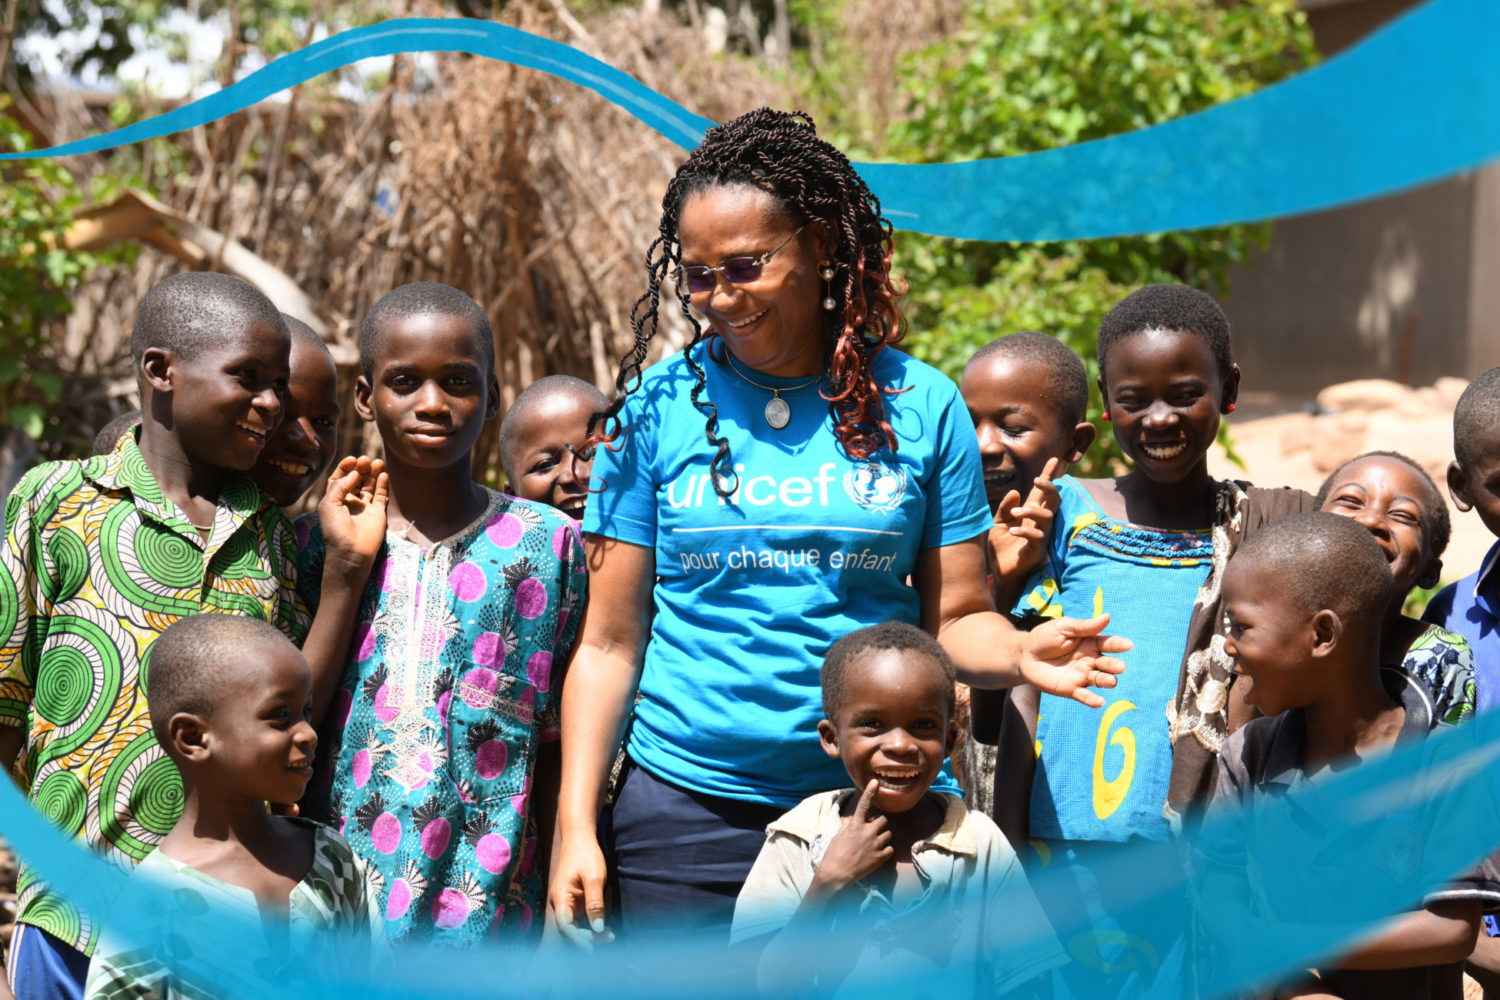 Image shows a UNICEF staff memeber standing with smiling children from a country office. The staff member is wearing a cyan blue and white UNICEF t-shirt.